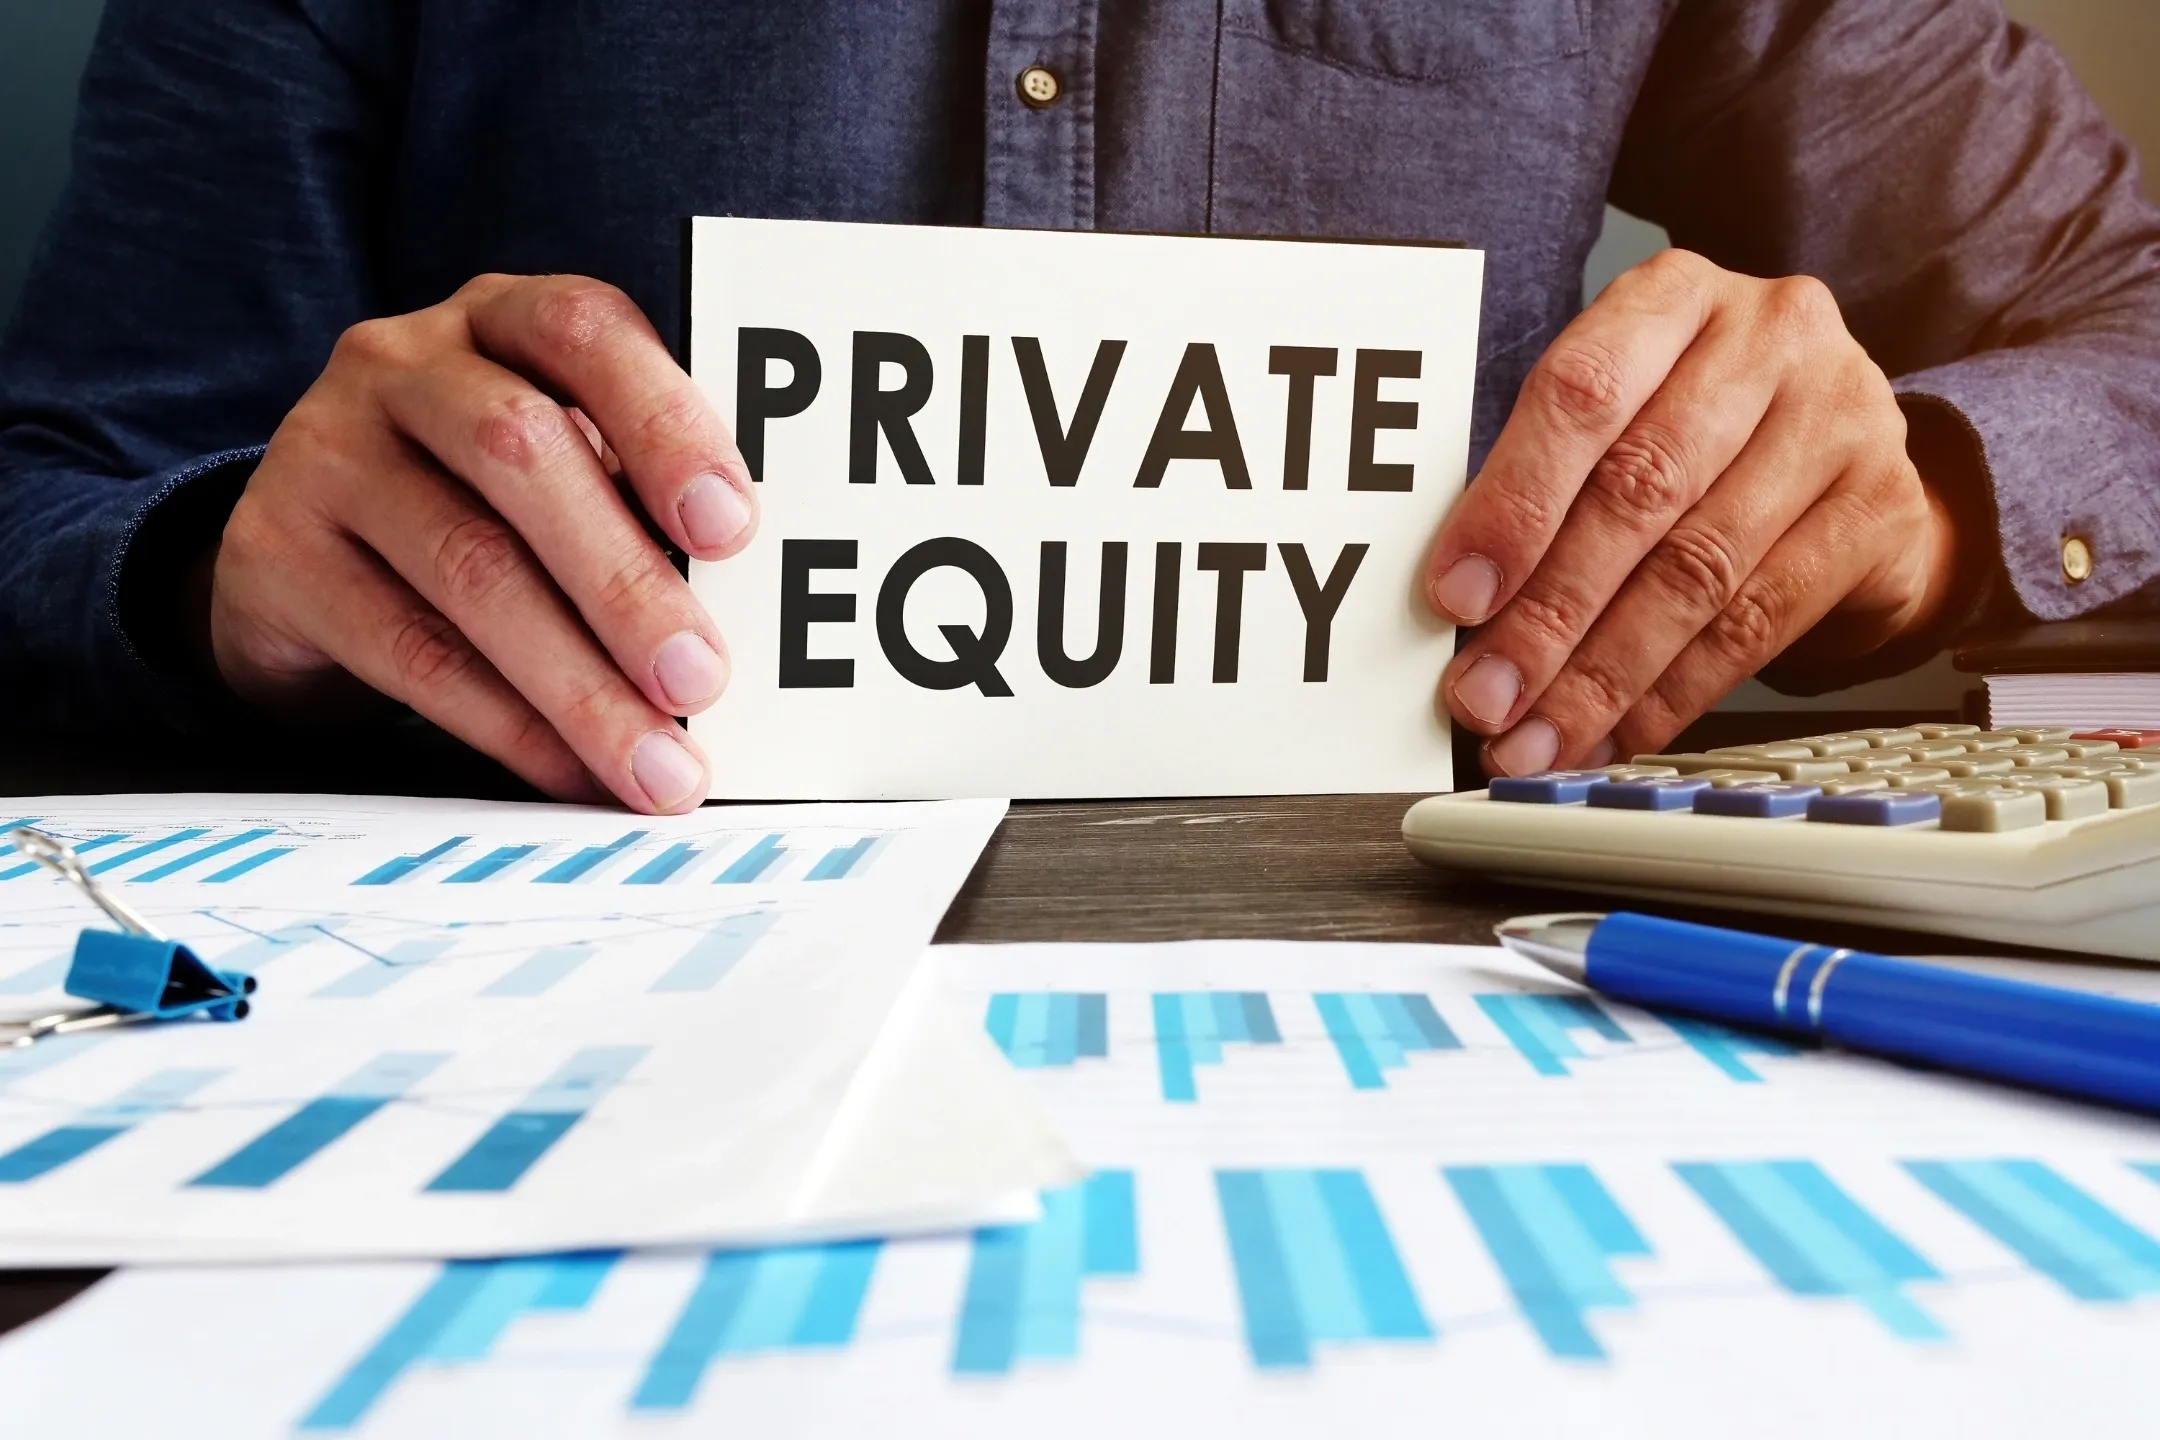 Of course Private Equity loves NetSuite